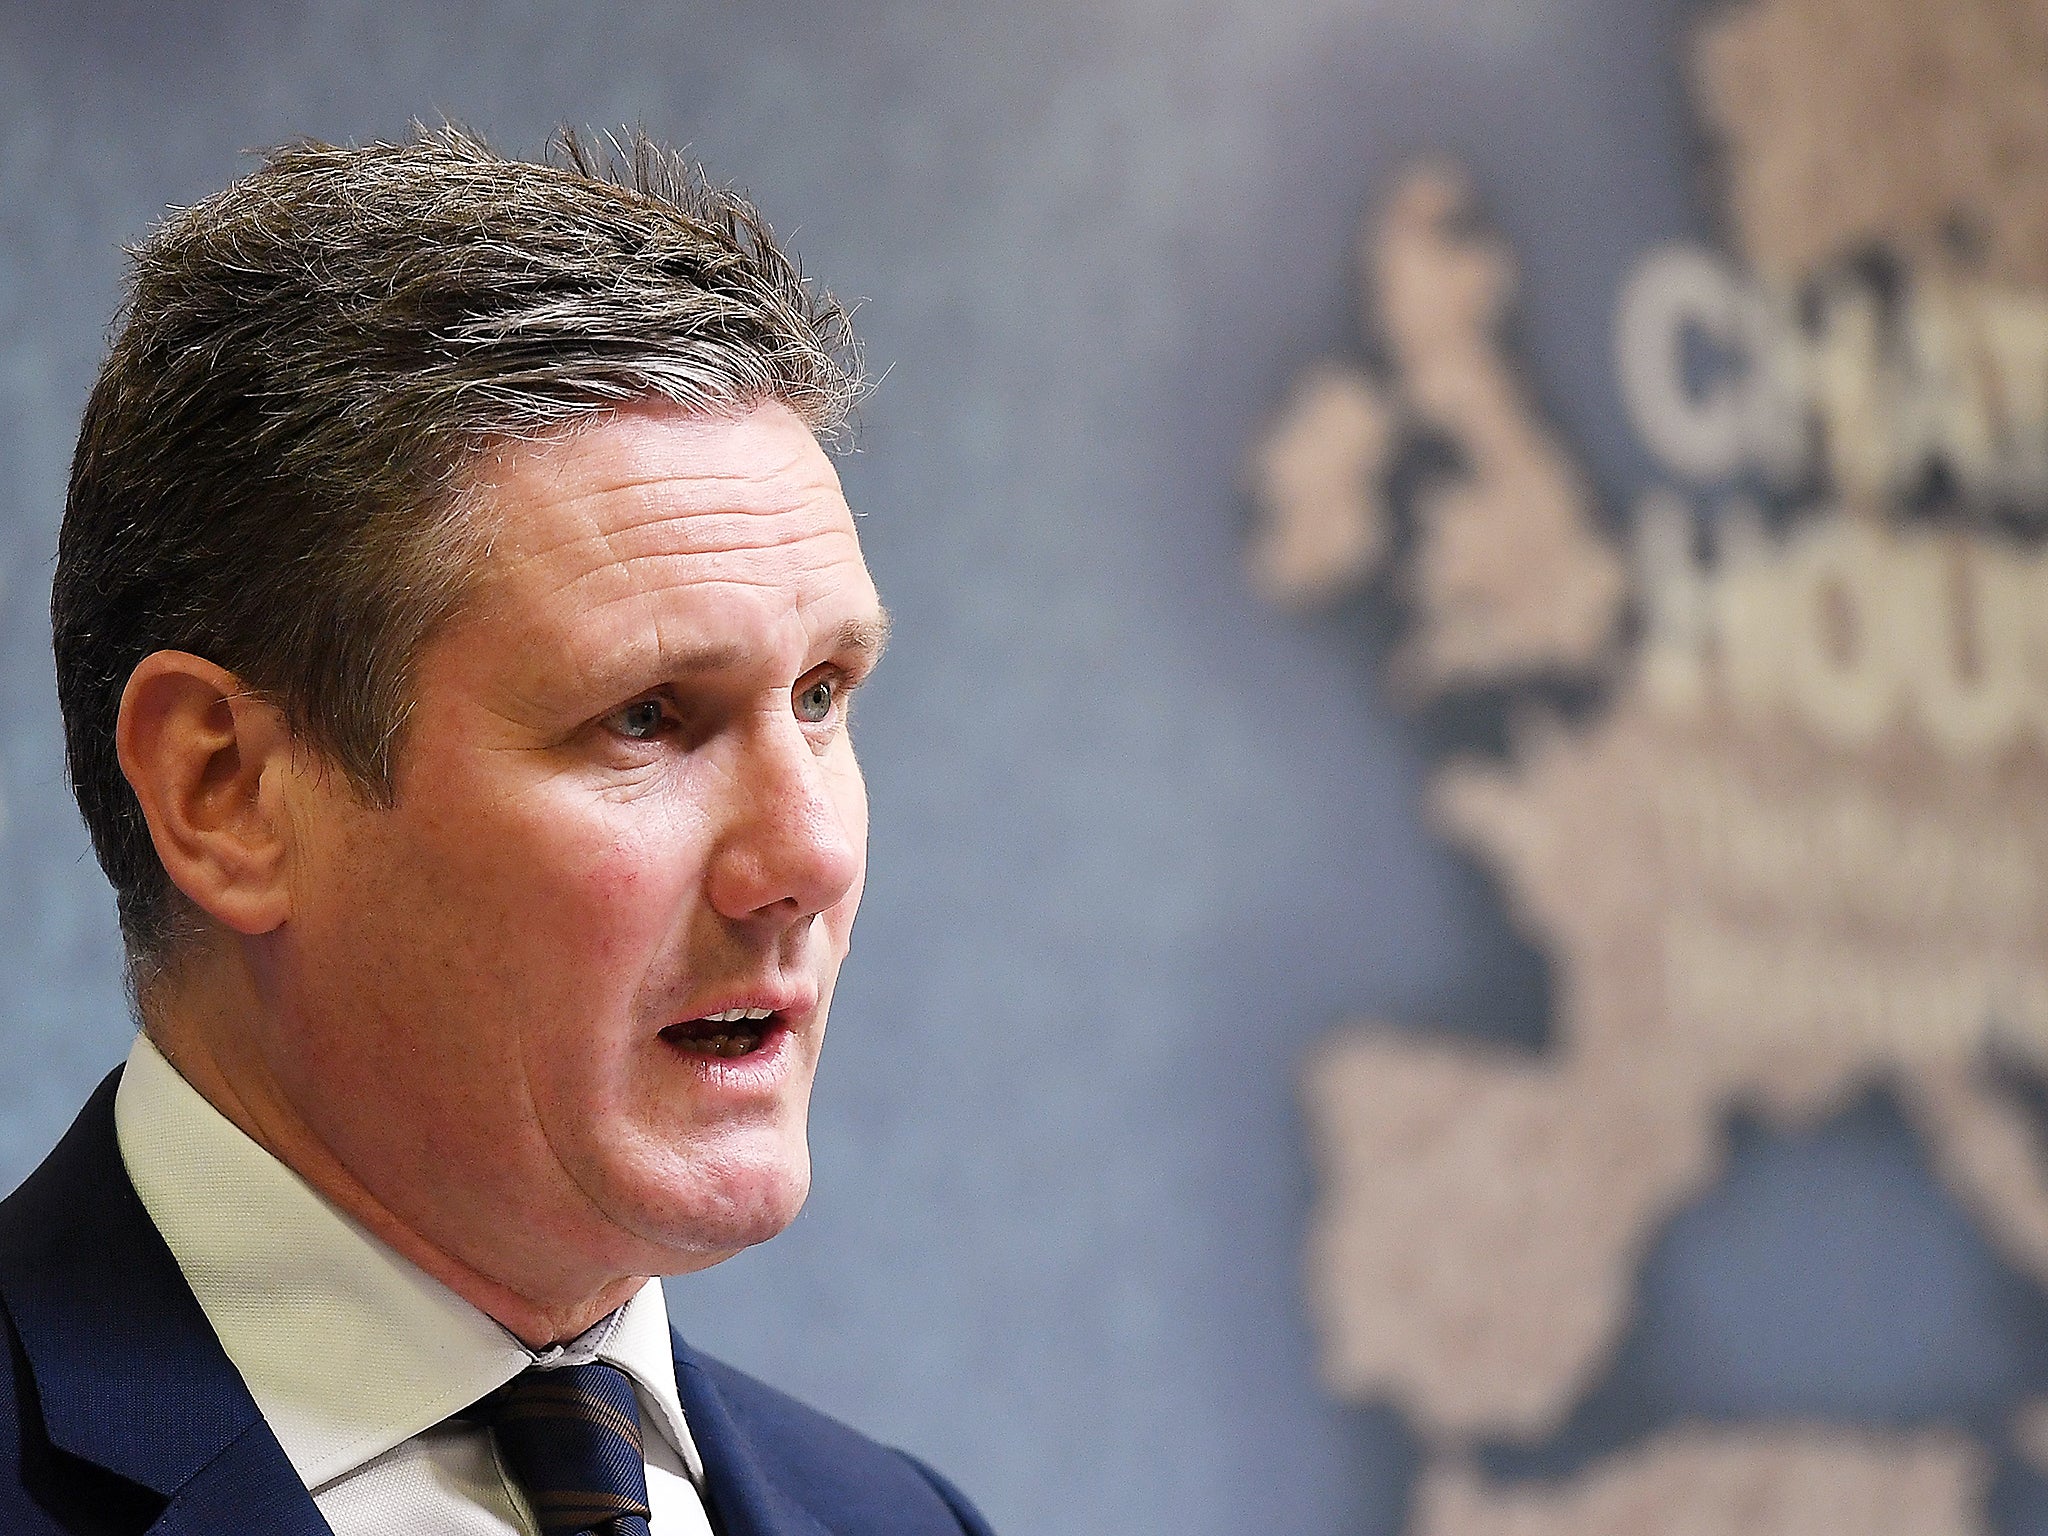 Shadow Secretary of State for Brexit, Sir Keir Starmer delivers a speech on Brexit in central London